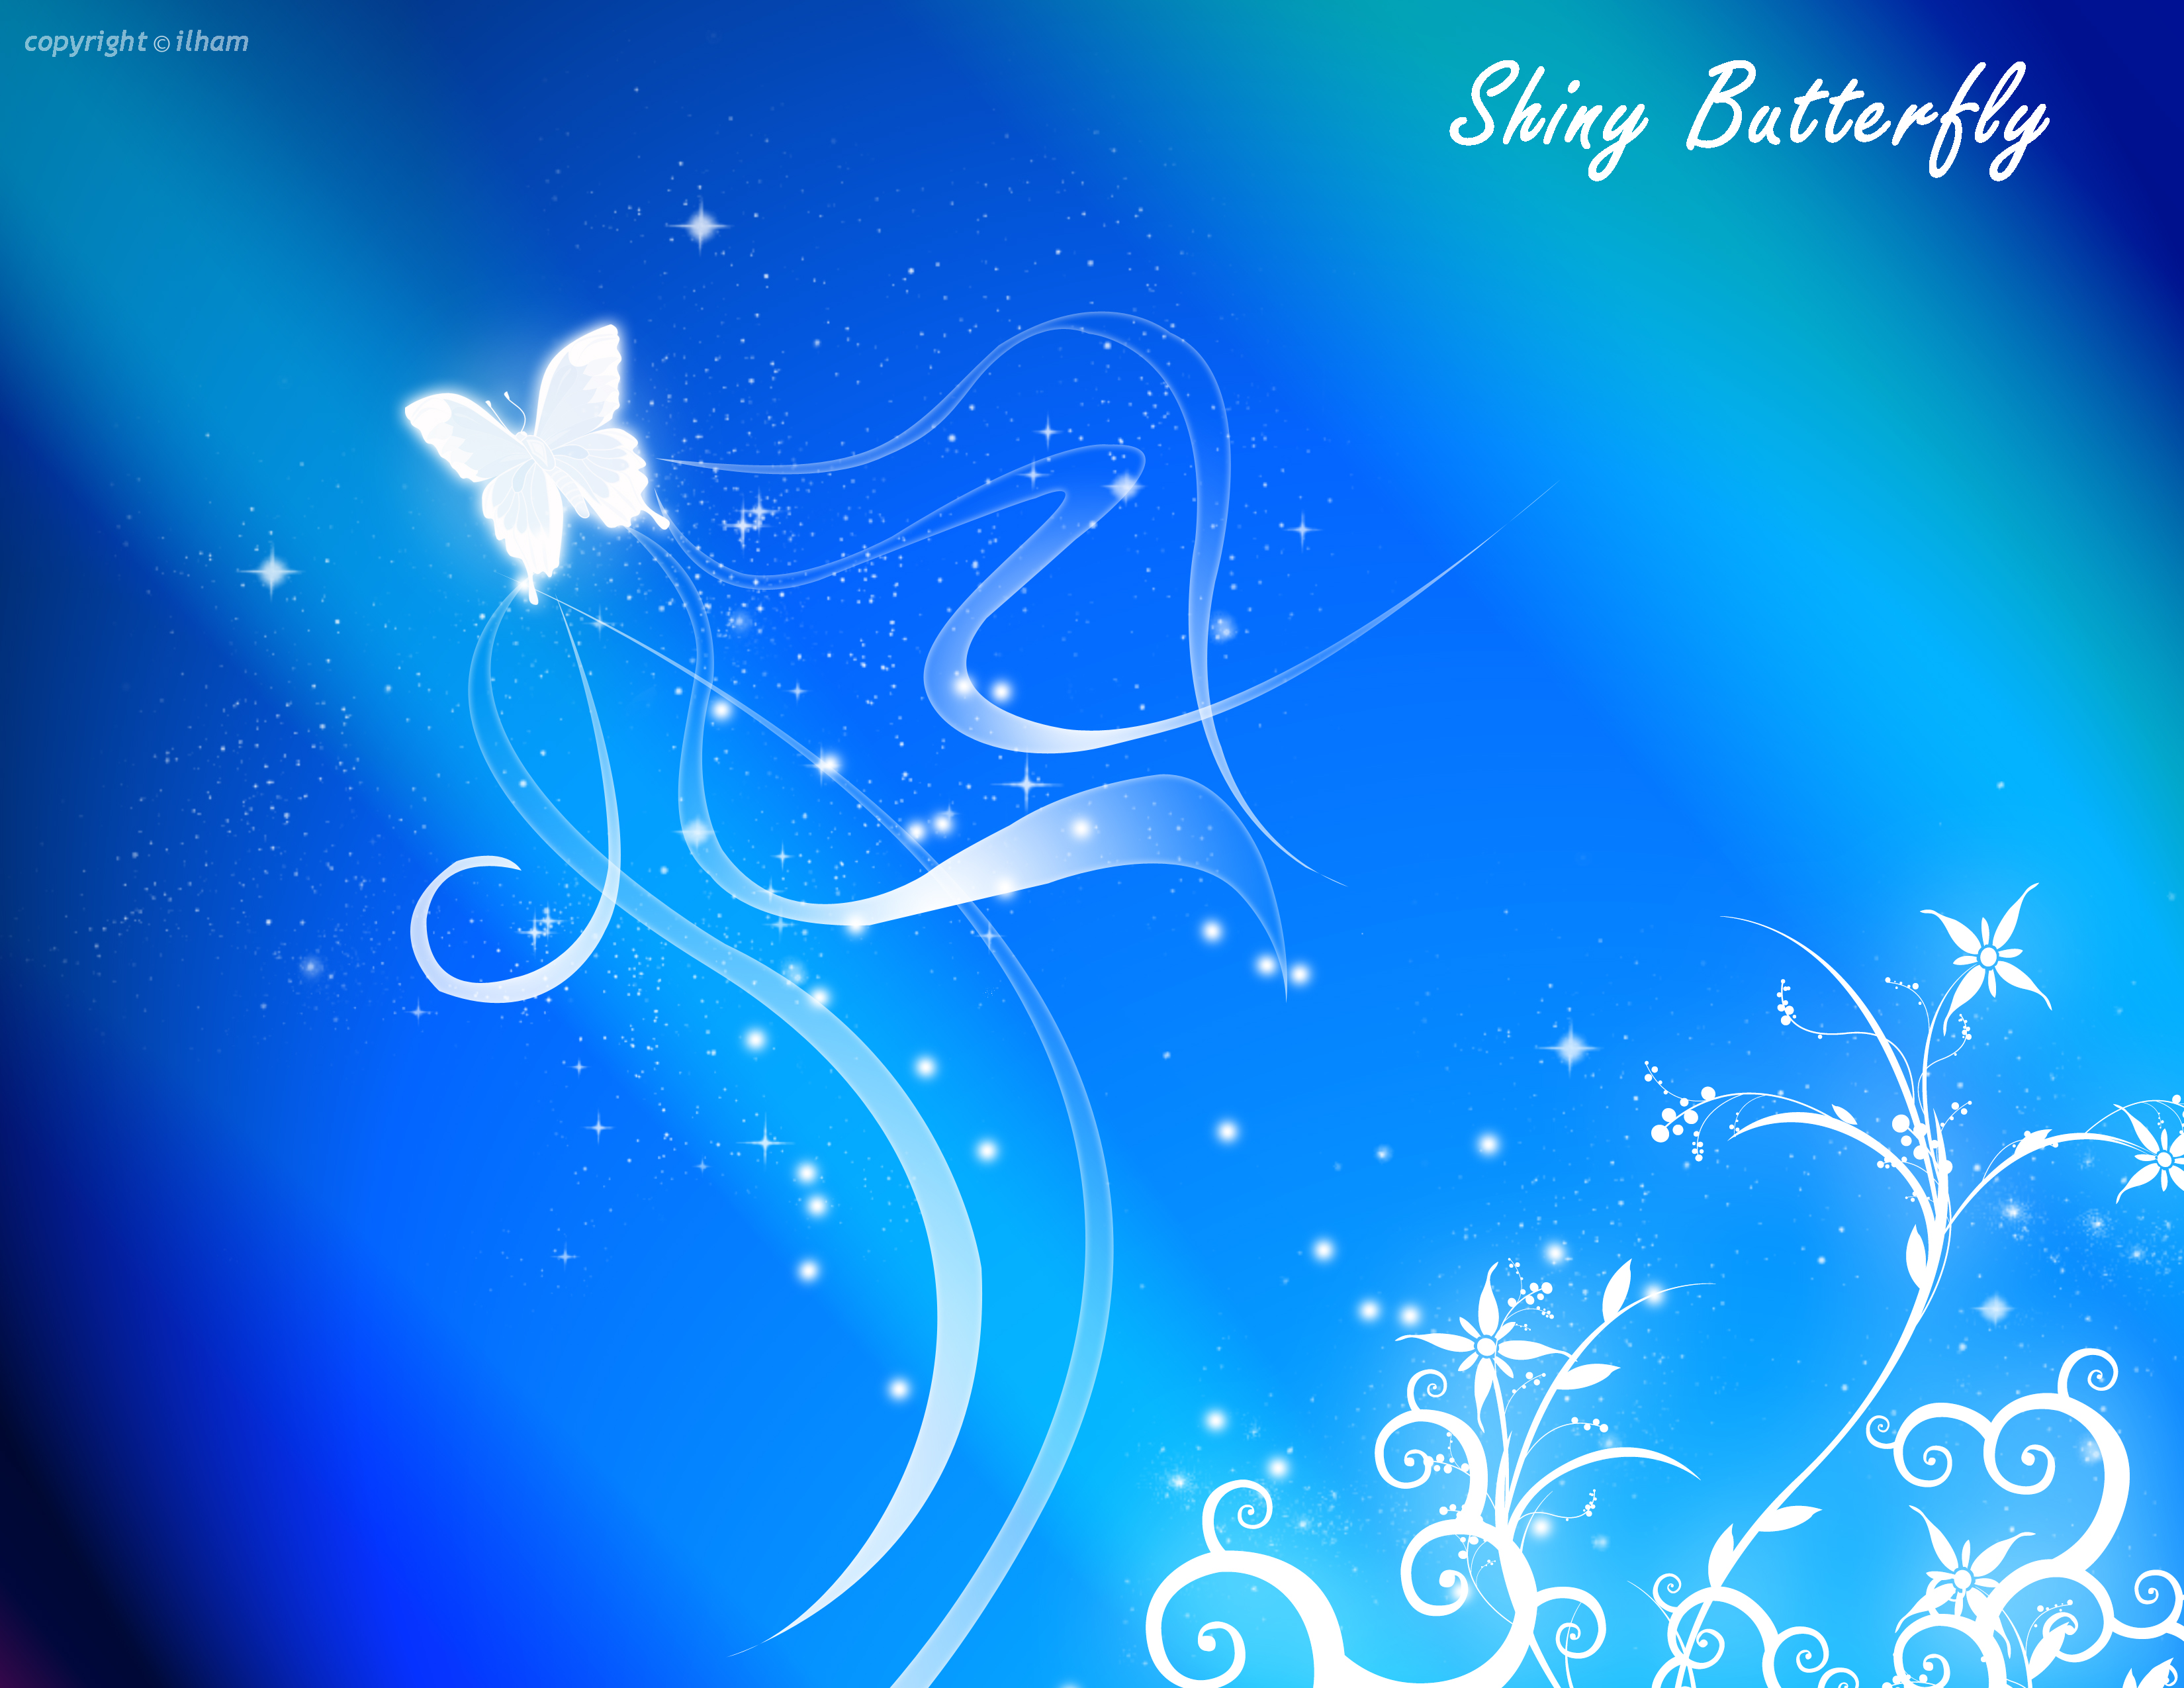 My First Post, Wallpaper Blue Shiny. By ilh4m88